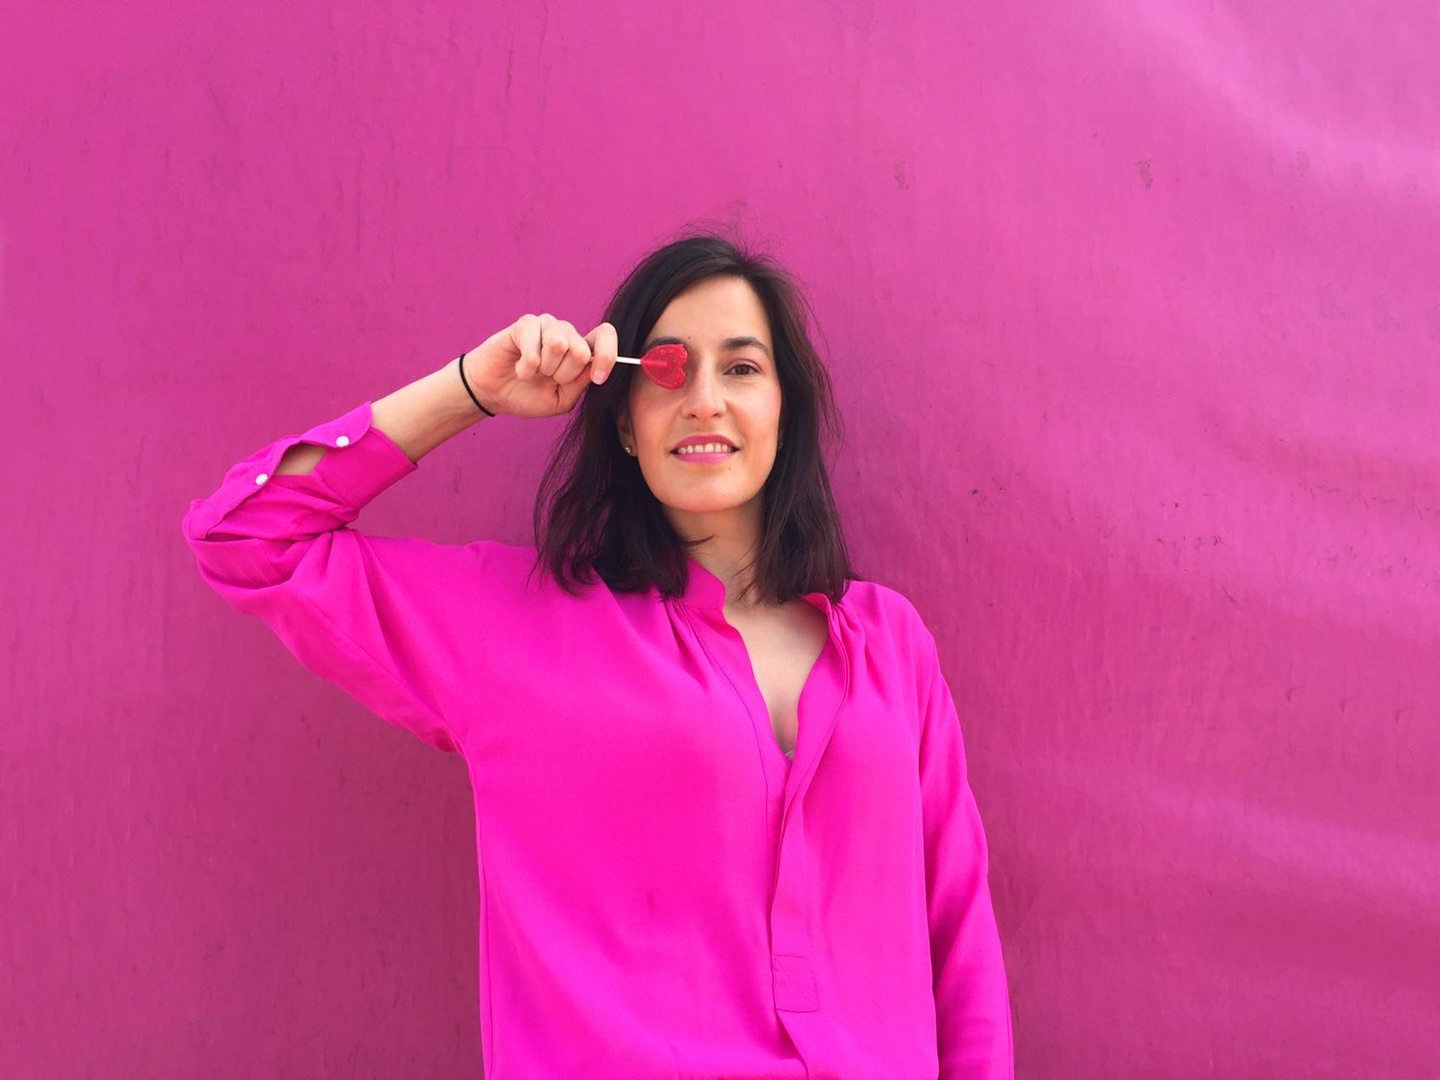 Style Indigo wearing a pink dress as a shirt to achieve the 30 wears challenge with a lolli-pop